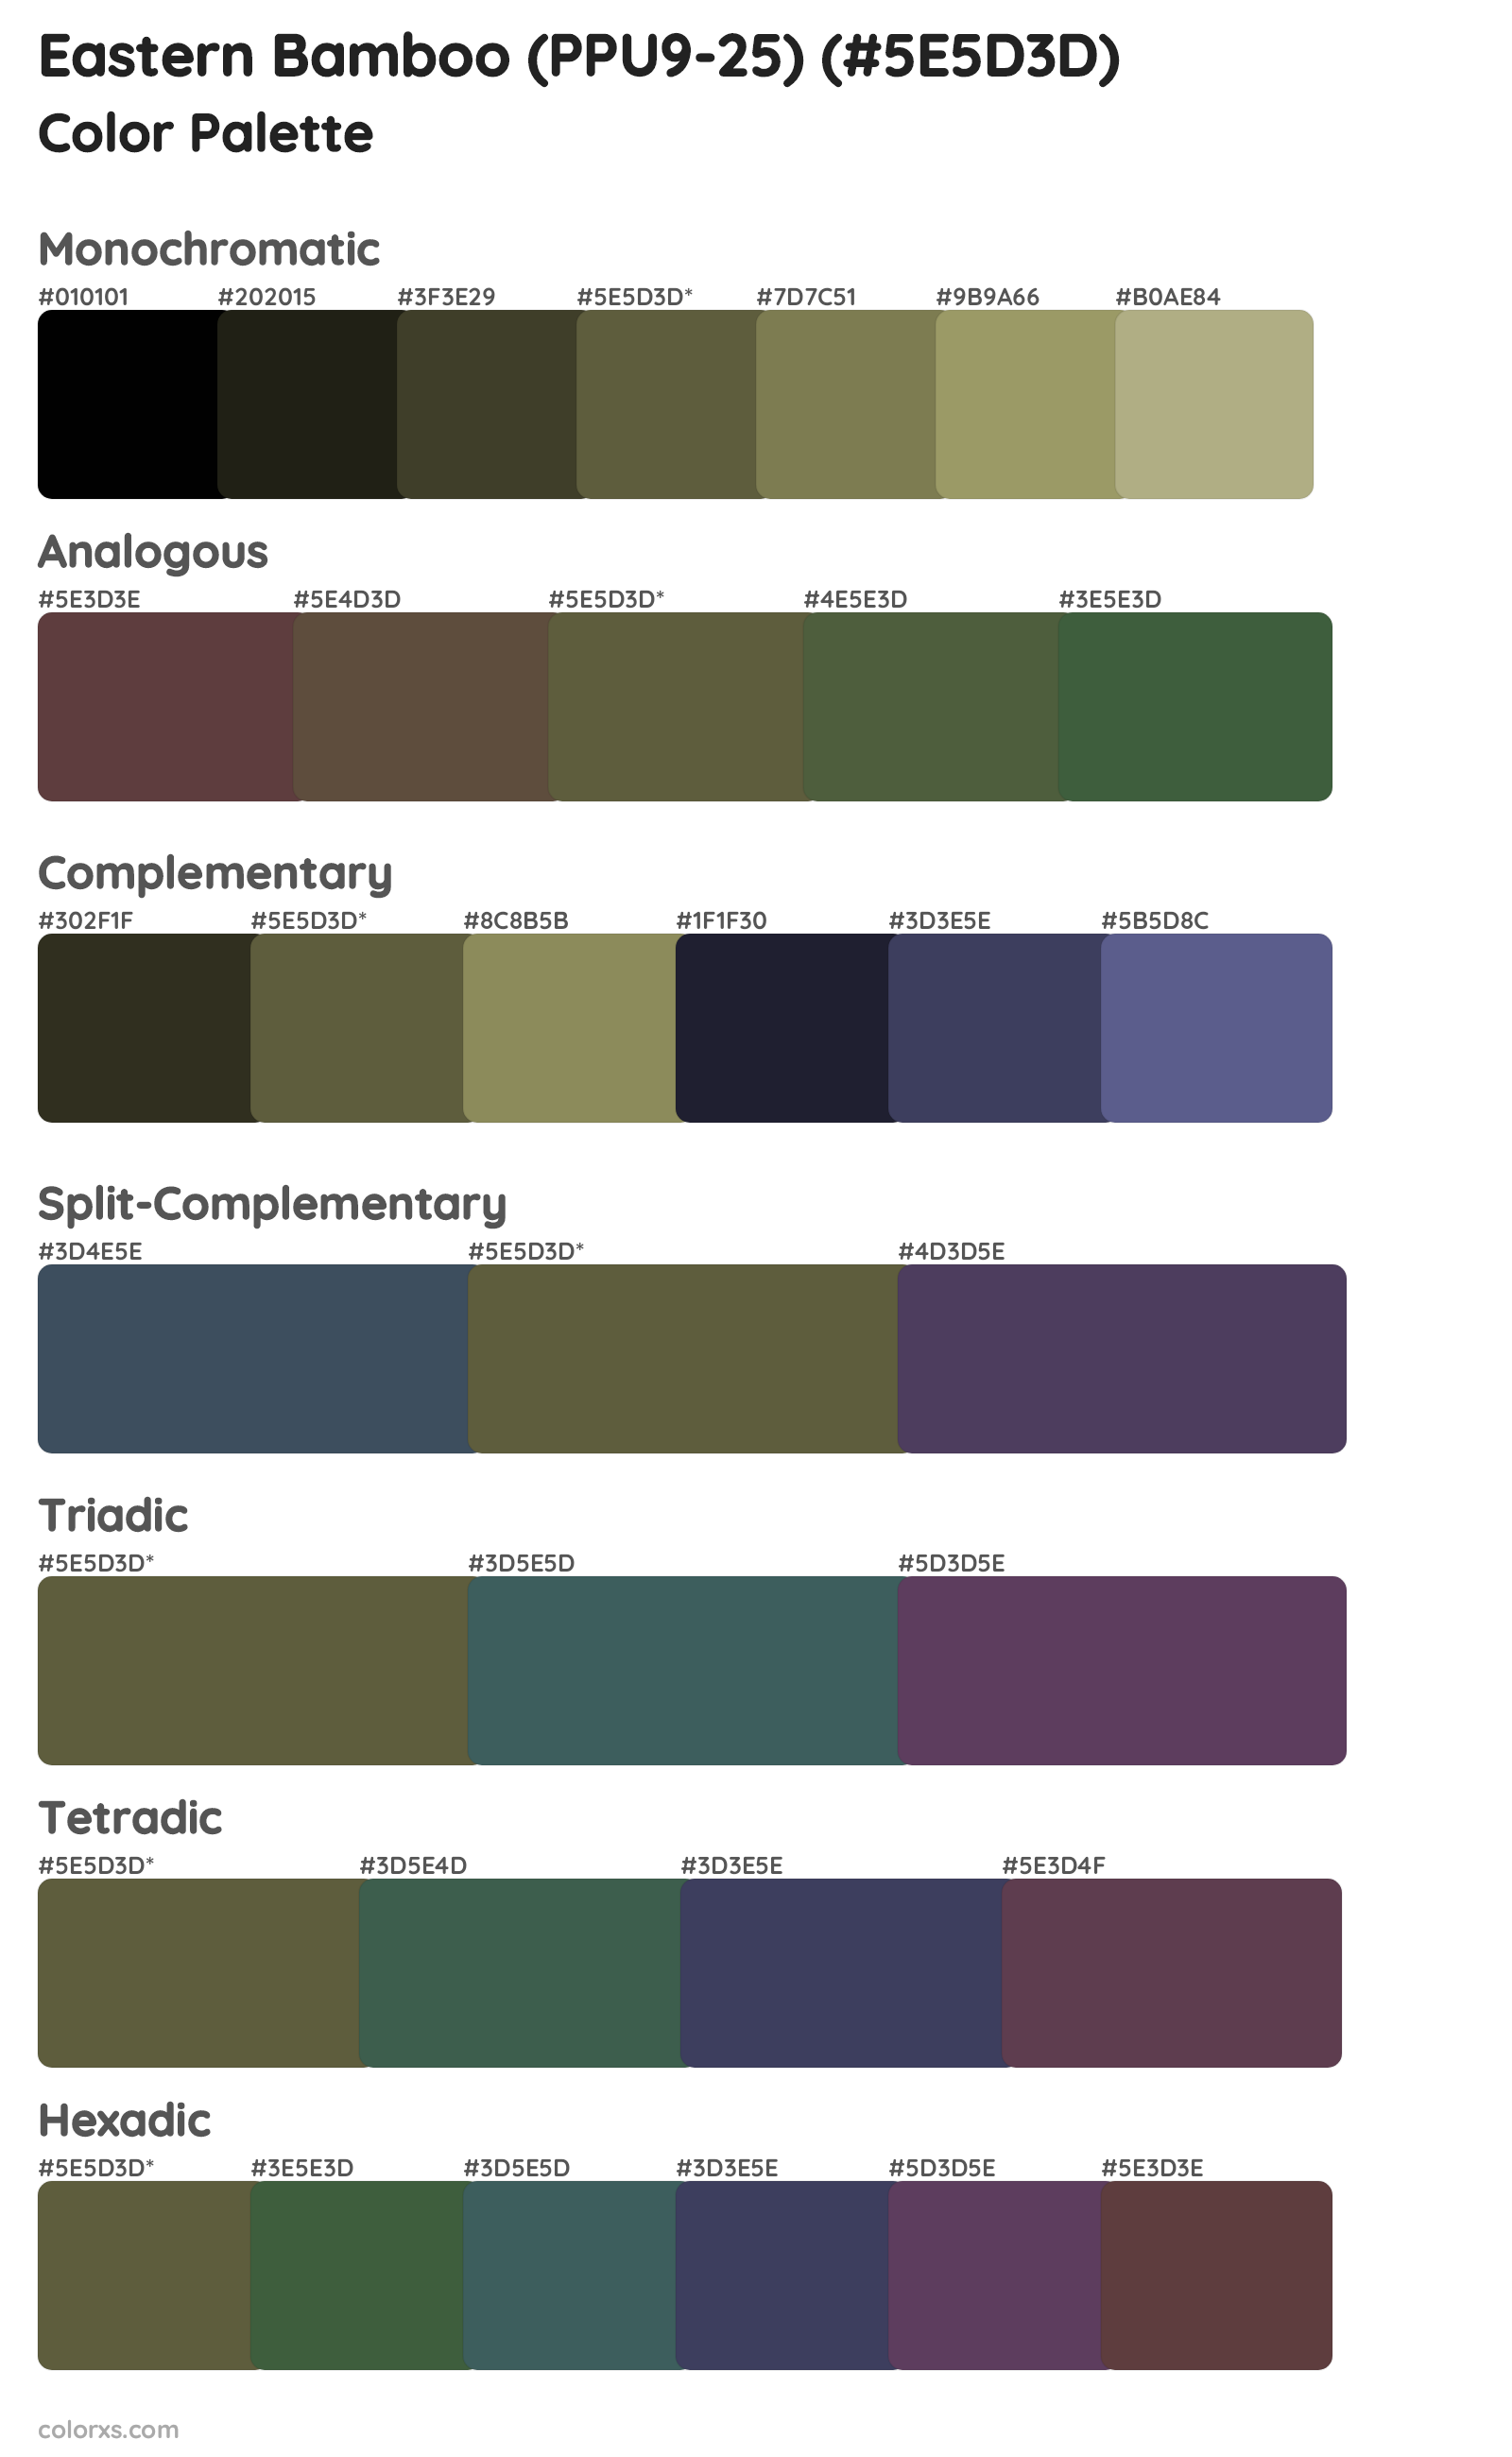 Eastern Bamboo (PPU9-25) Color Scheme Palettes